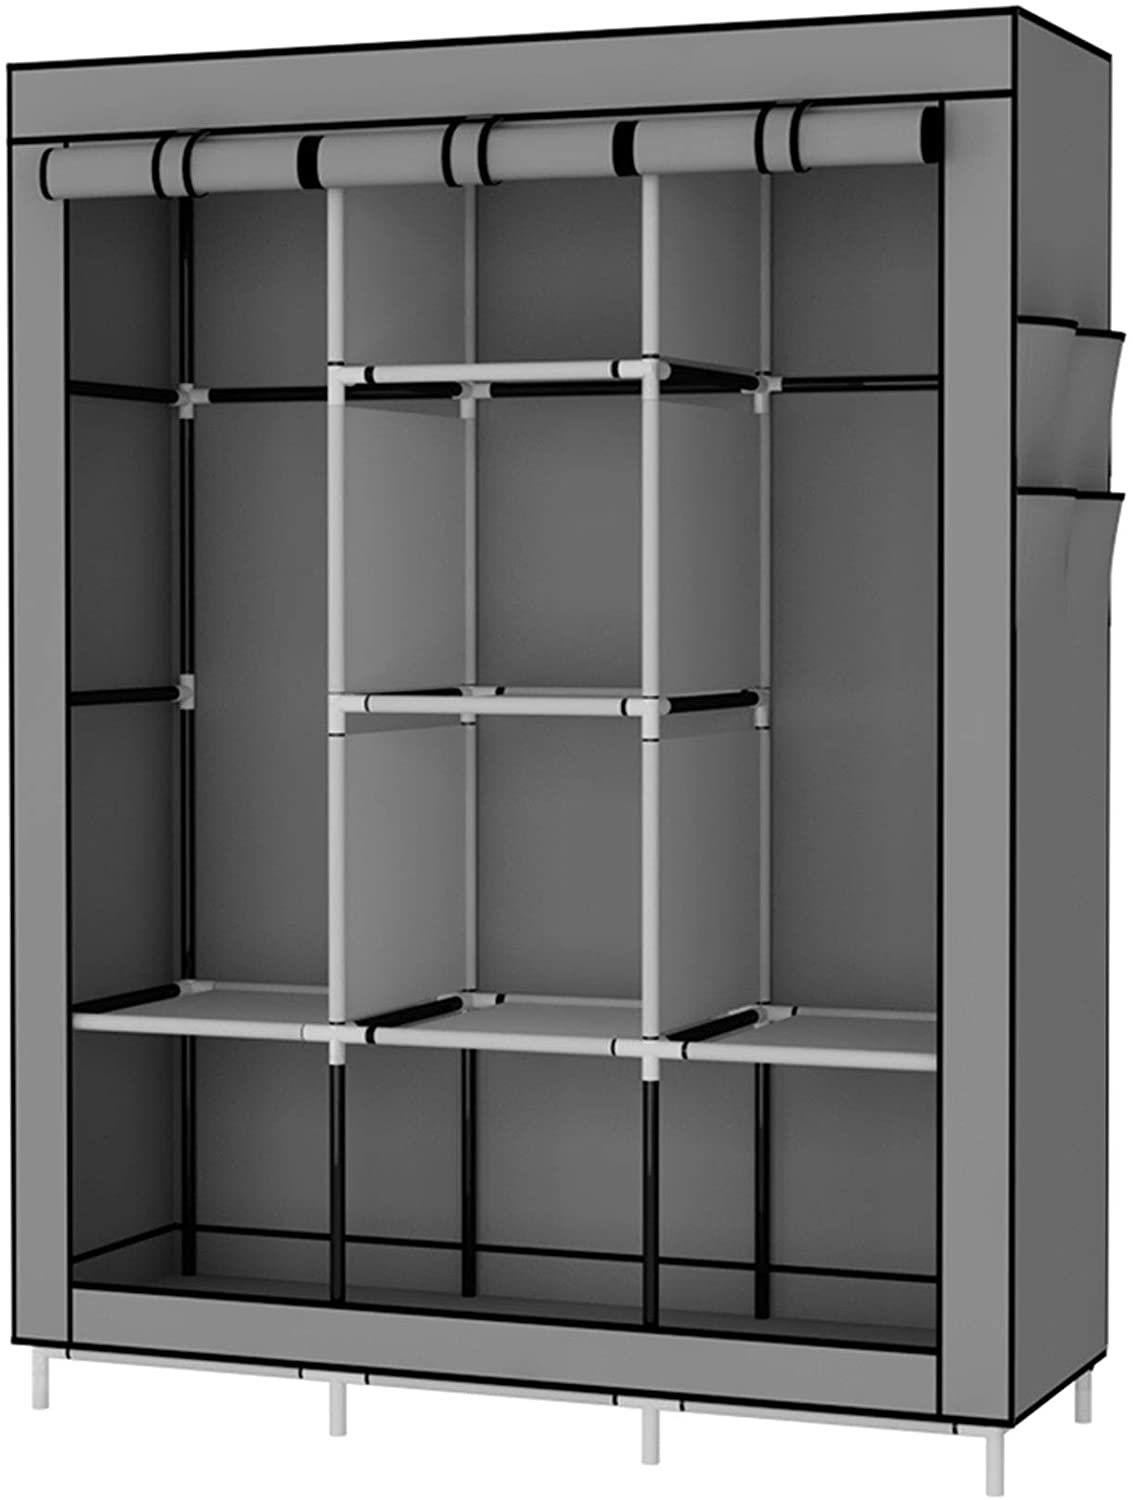 Detachable and easy to assemble 4-layer 8-compartment simple non-woven home adjustable wardrobe storage cabinet